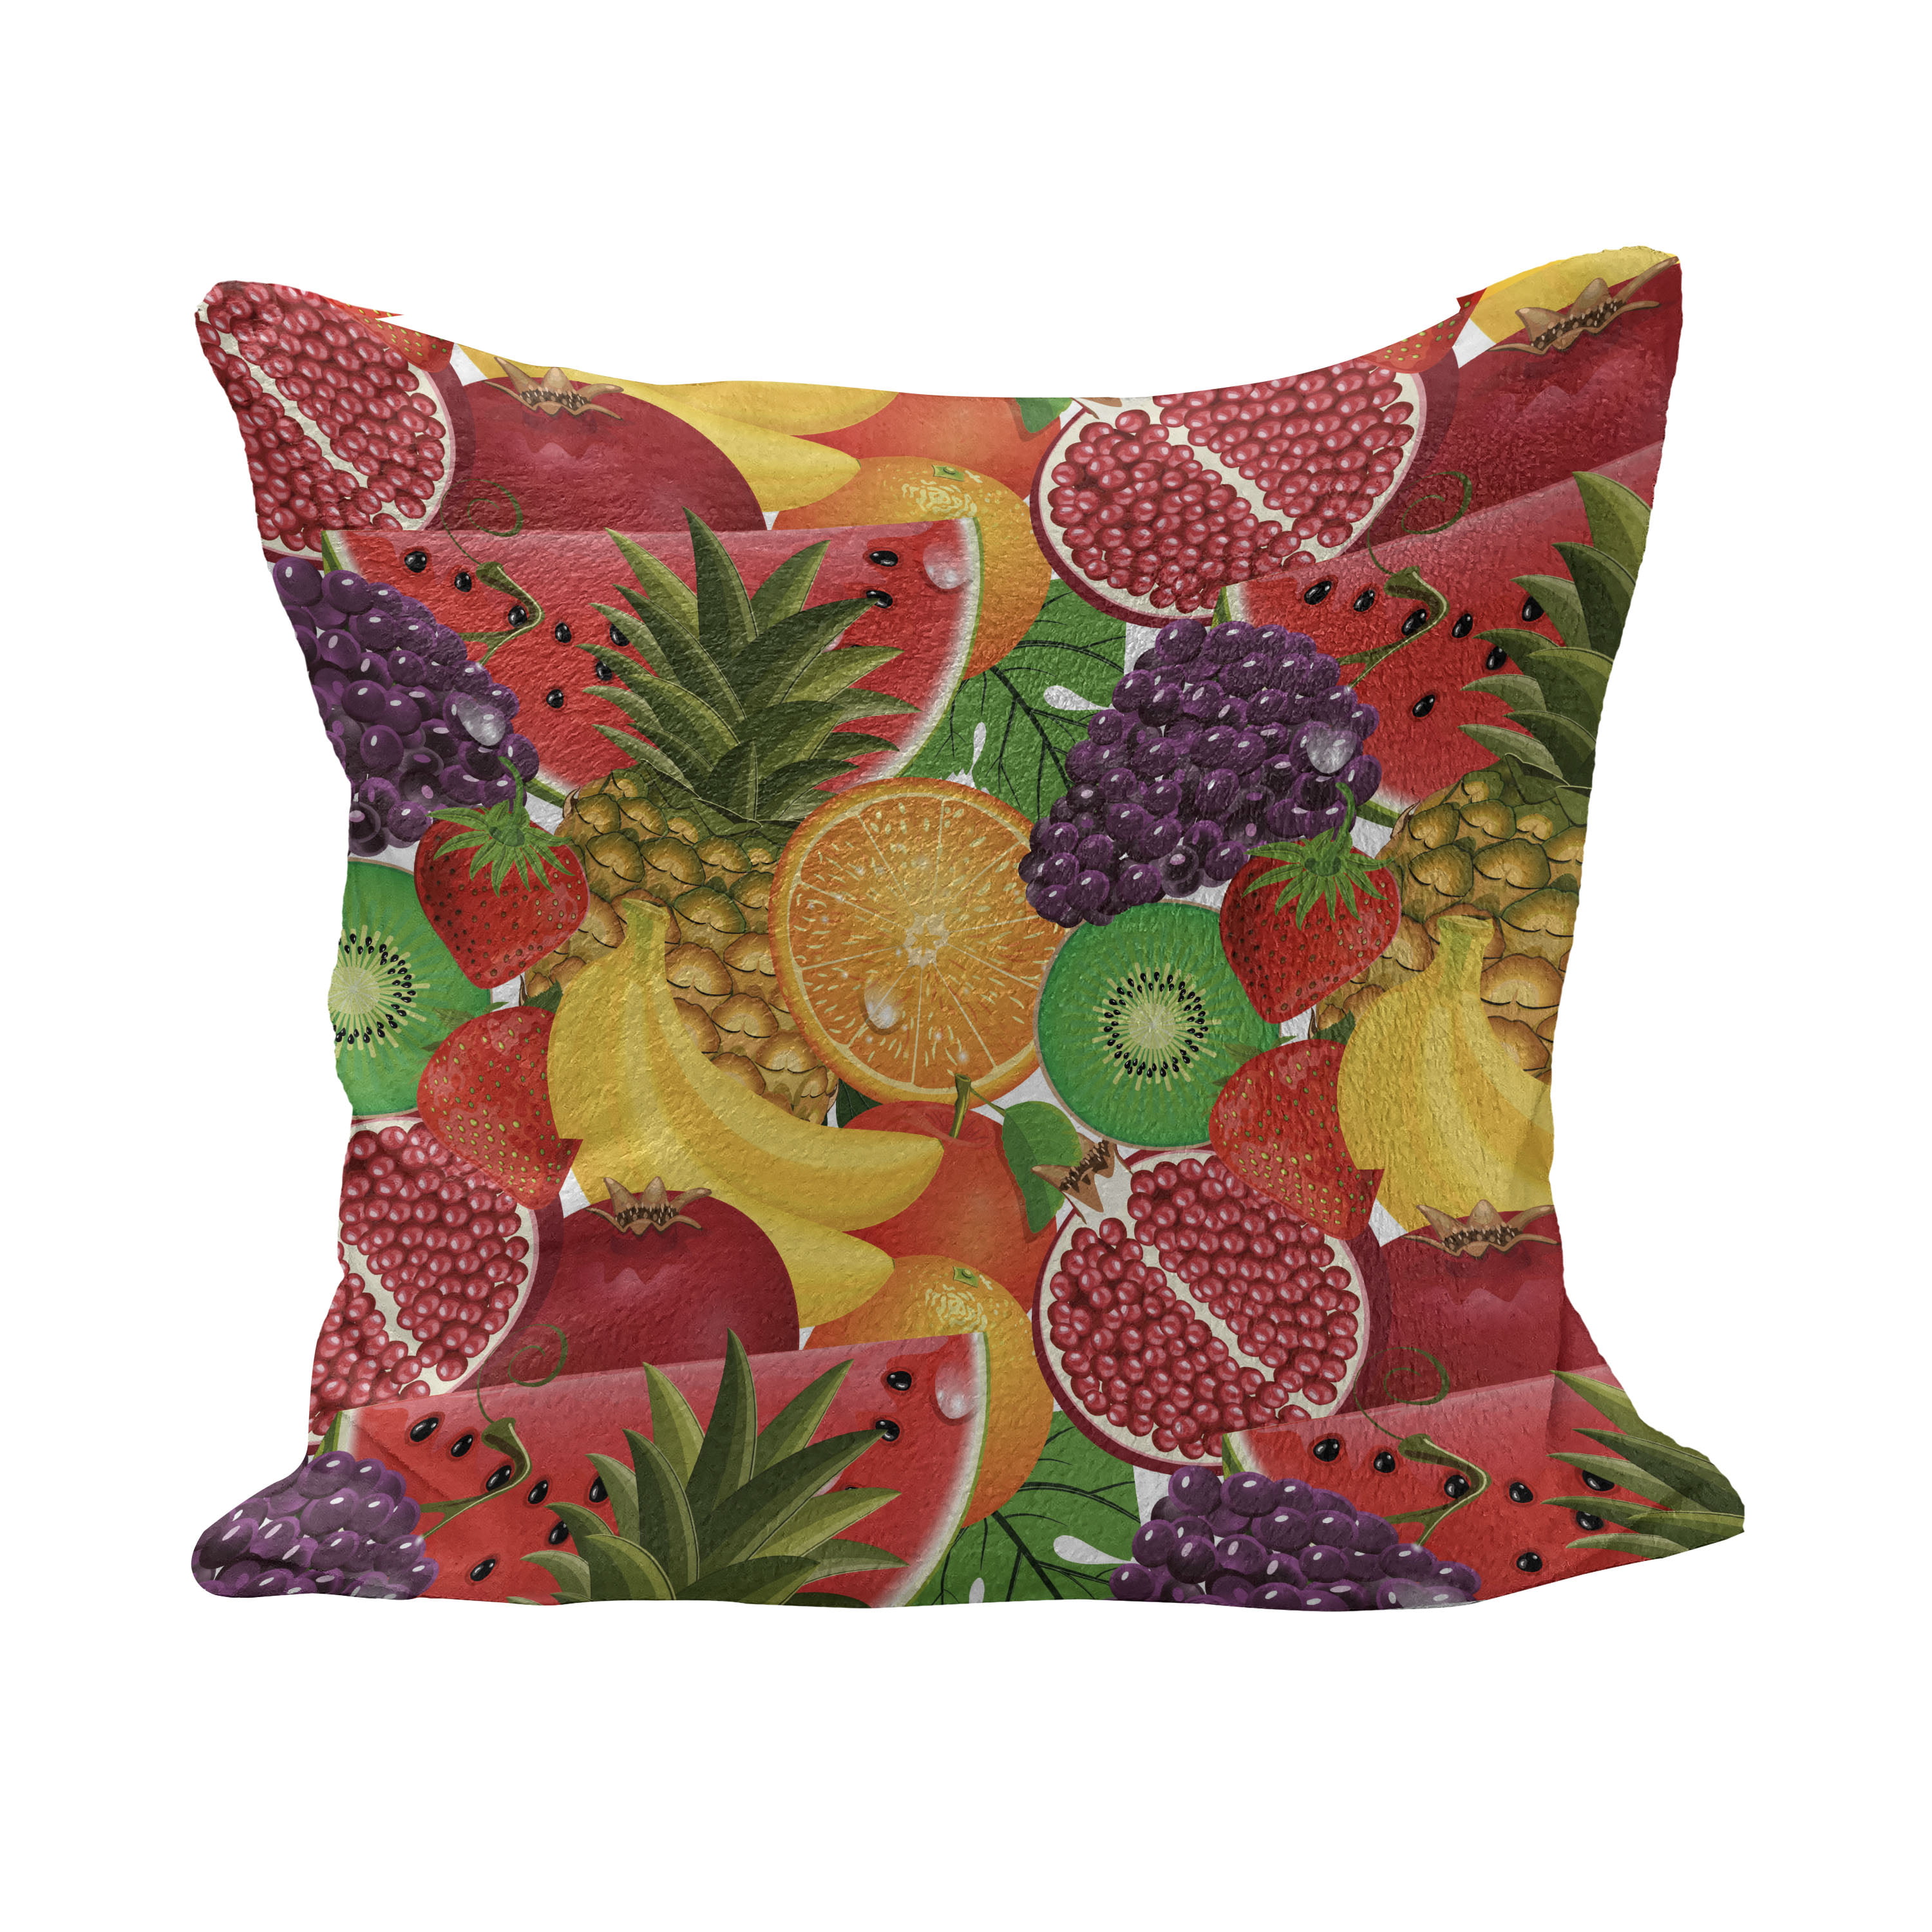 18x18 Multicolor Pineapple Graphic Throw Pillow Throw Pillow